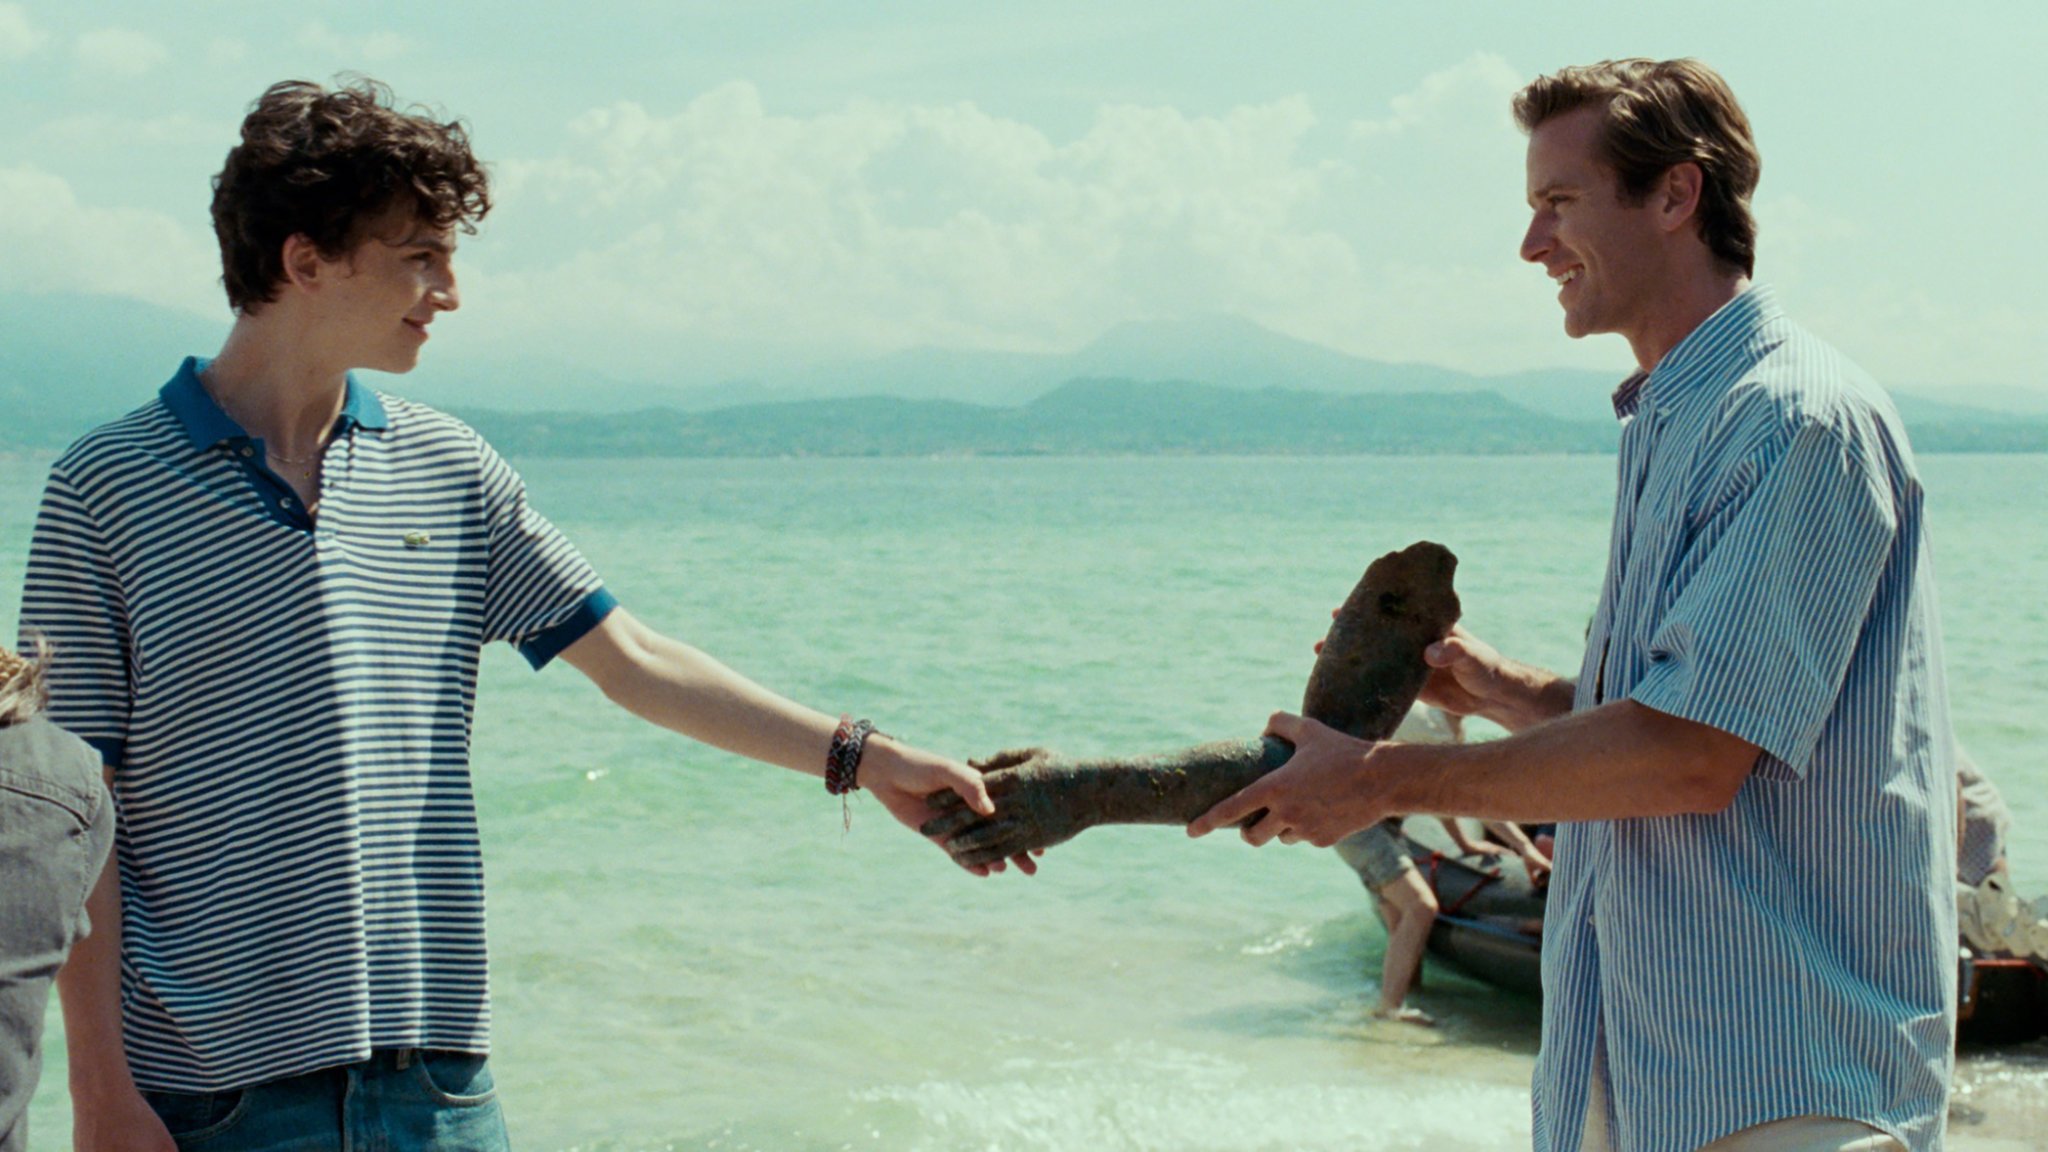 Oliver Elio Call Me By Your Name - HD Wallpaper 